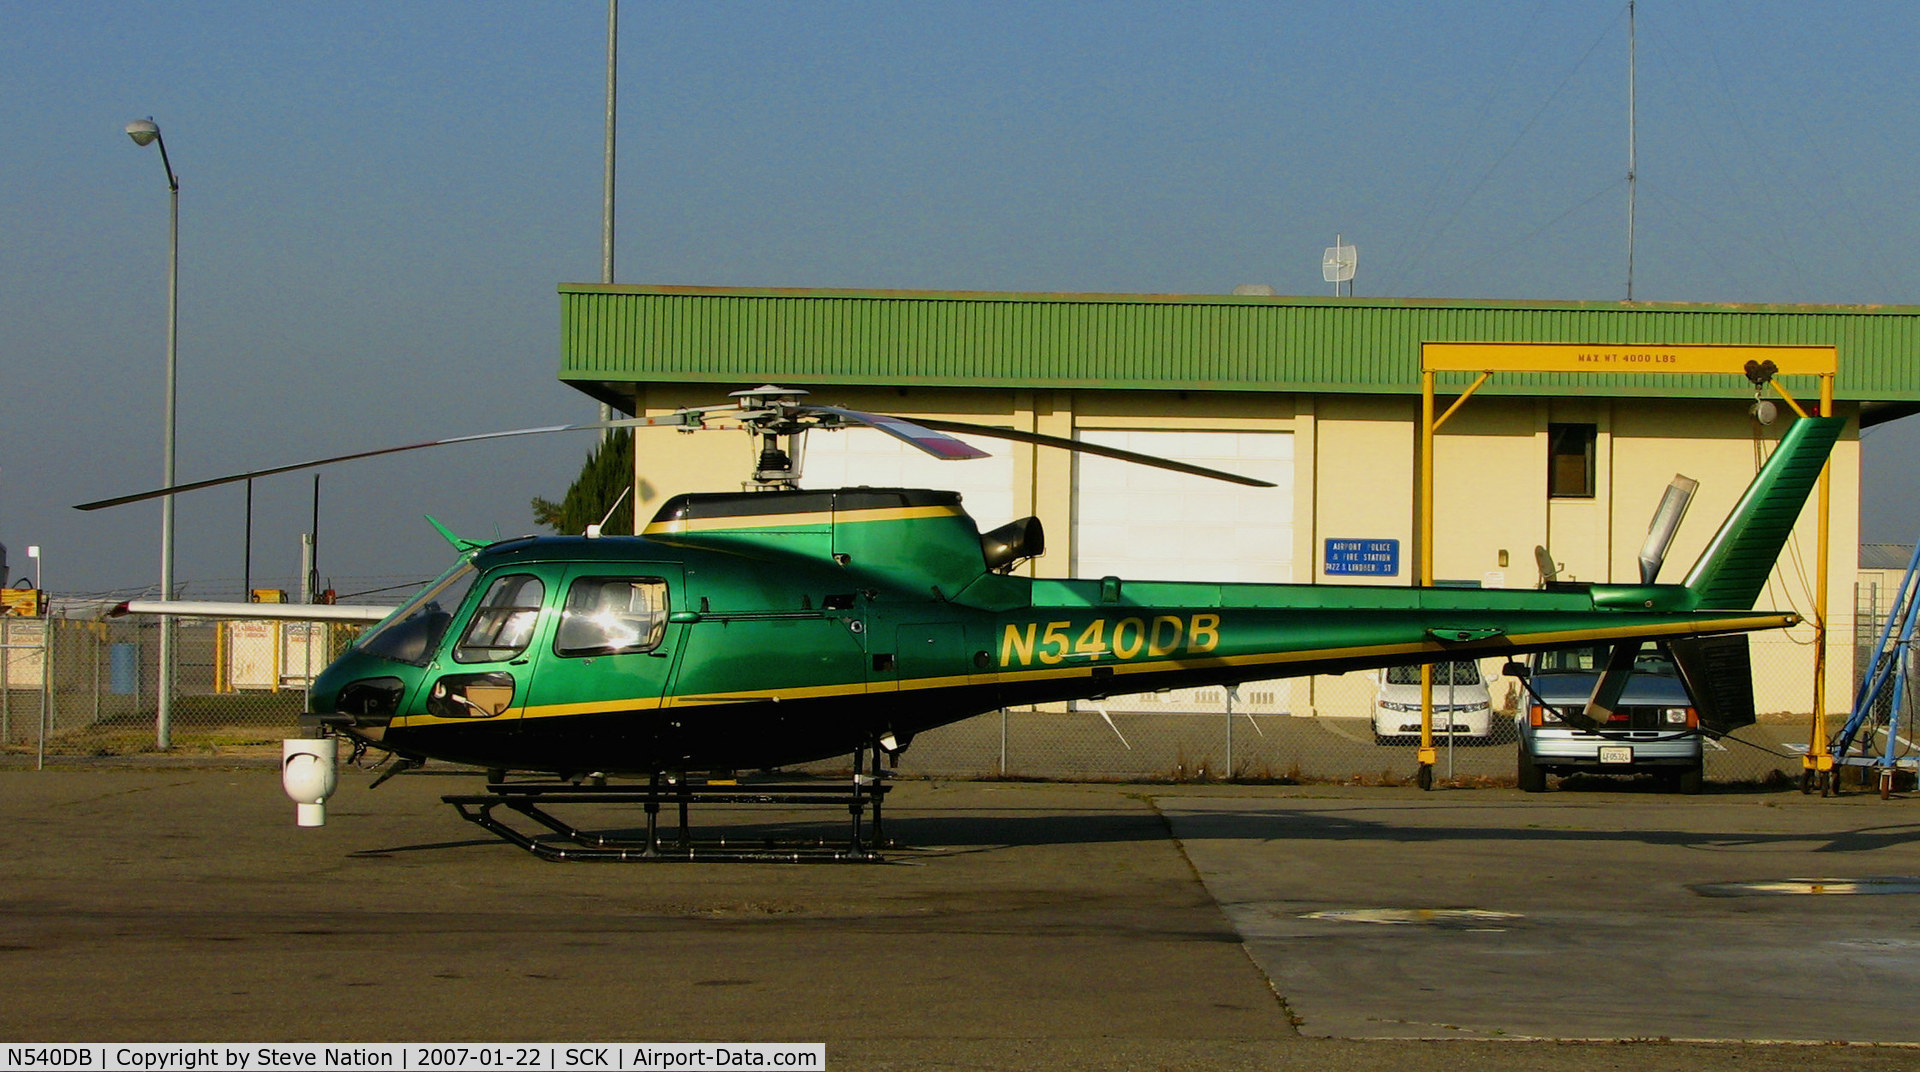 N540DB, 1999 Eurocopter AS-350B-2 Ecureuil Ecureuil C/N 3218, U.S. Department of Justice 1999 Eurocopter AS350B2 with infrared camera @ Stockton Municipal Airport, CA